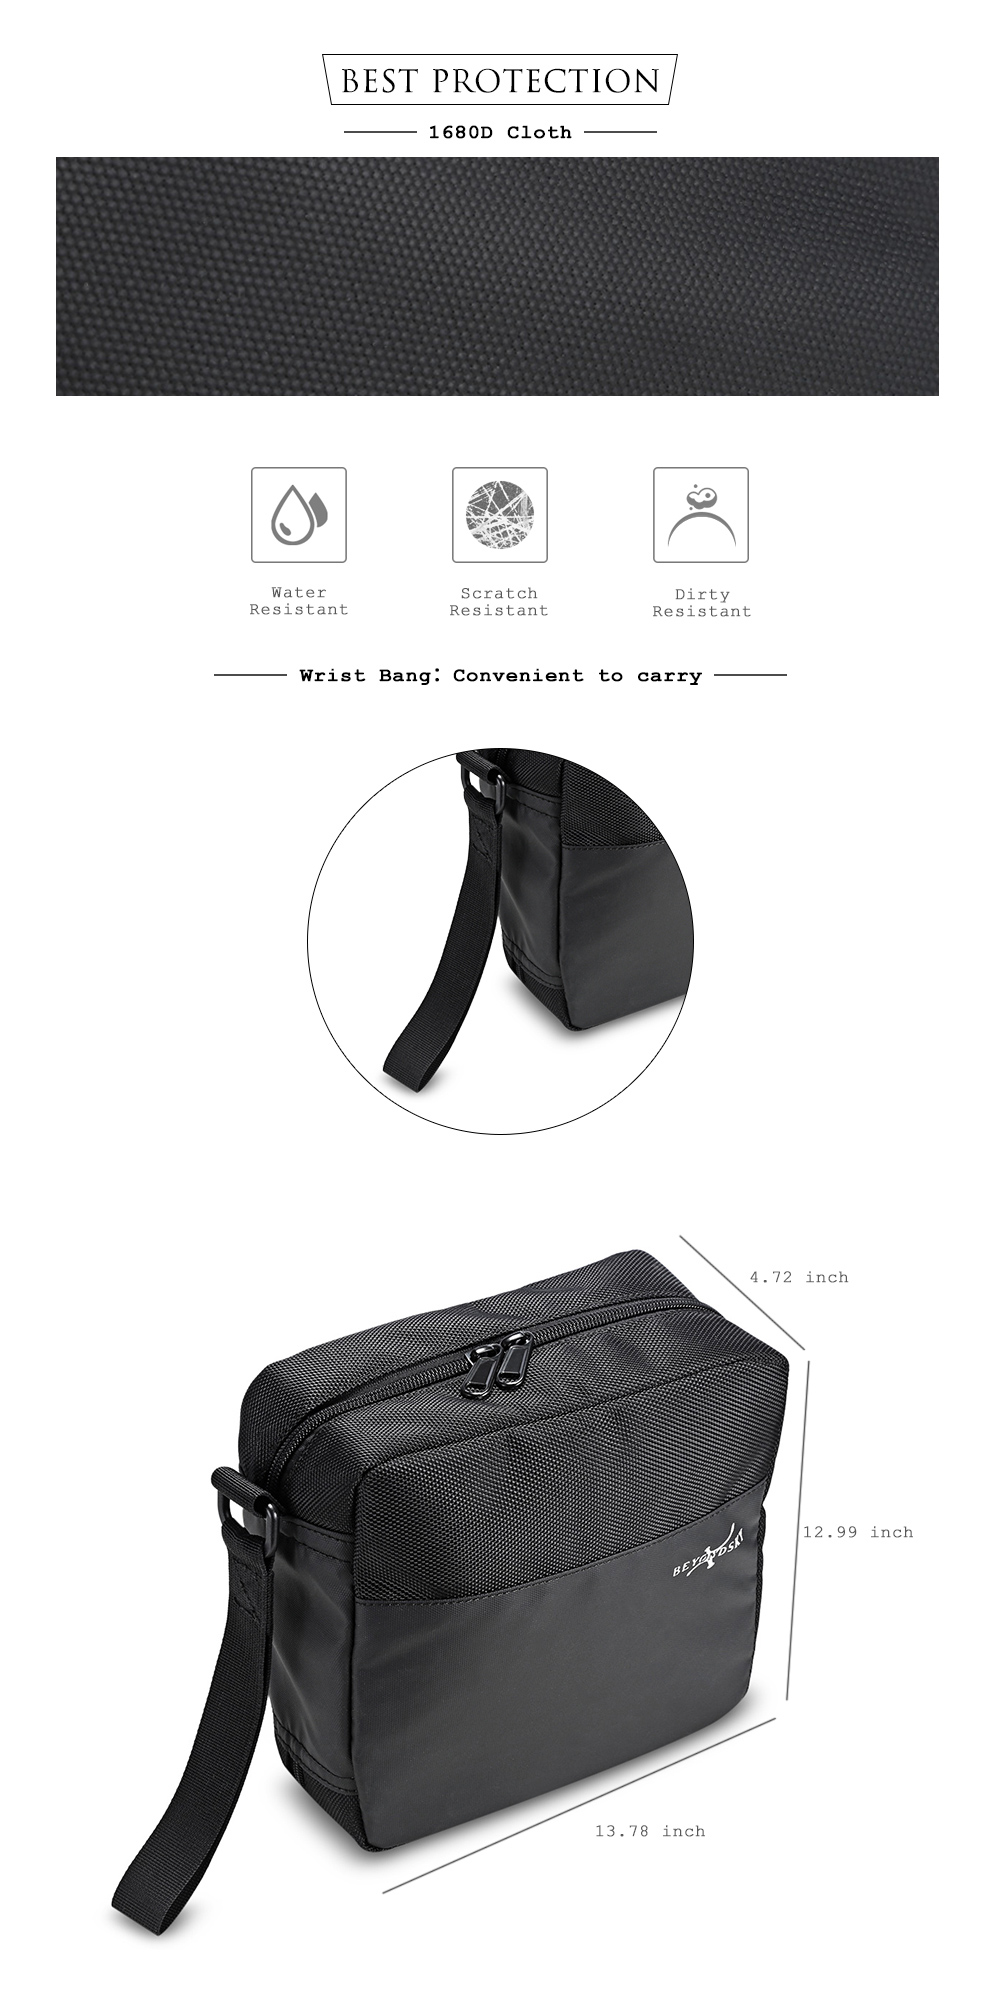 Portable Water Resistant Drone Carrying Wrist Bag Travel Storage Sleeve Package for DJI Spark RC Quadcopter